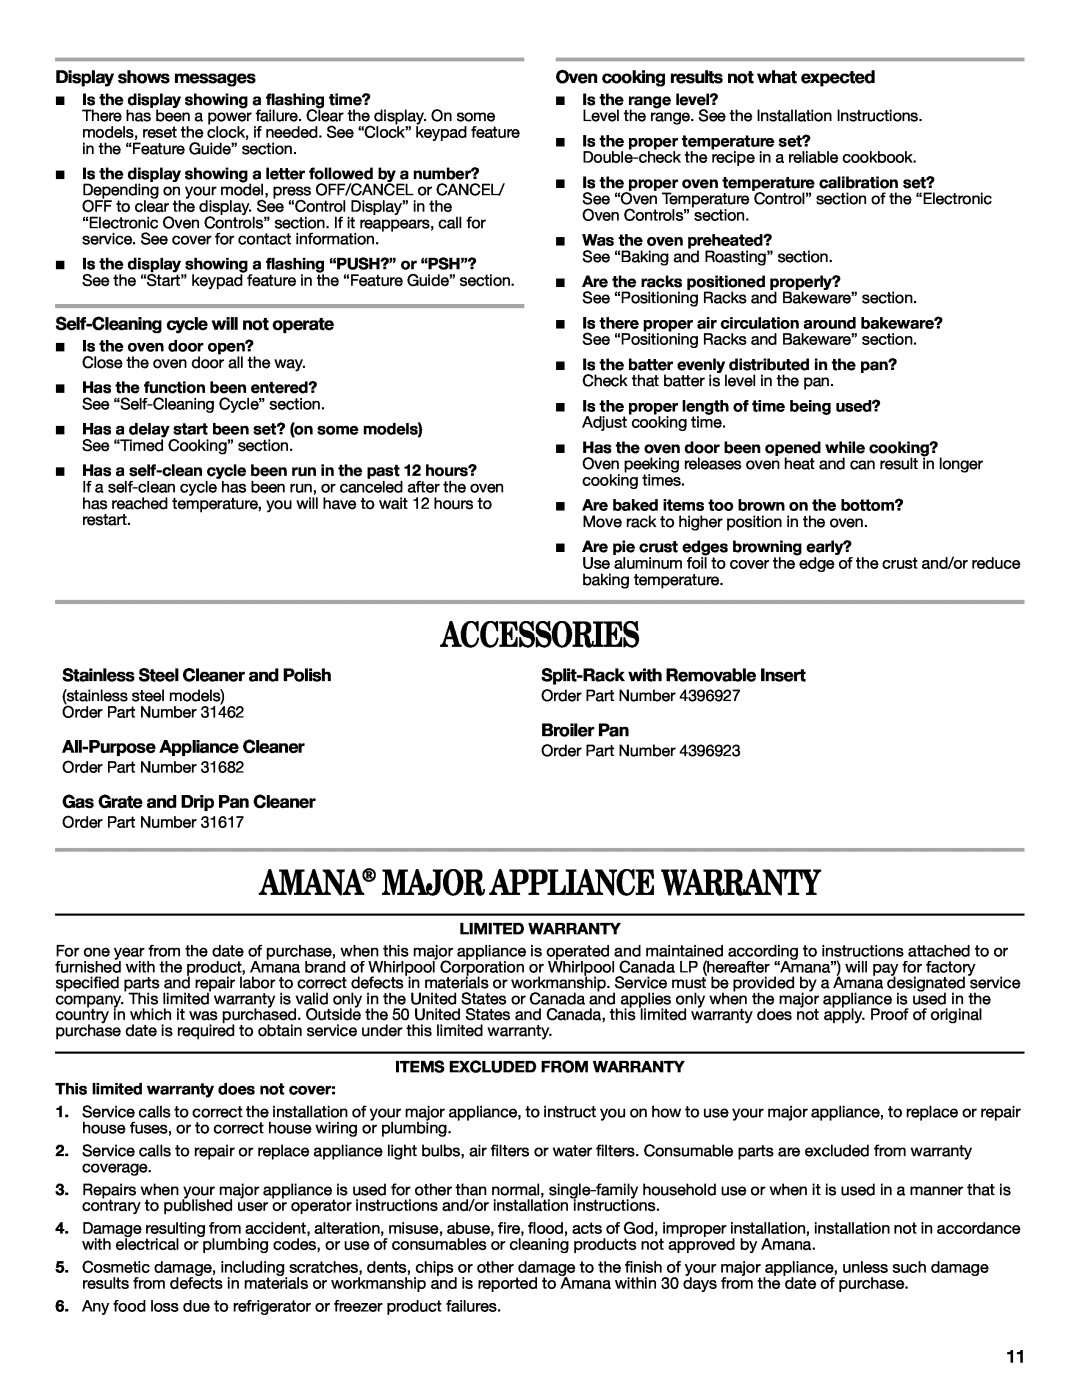 Amana AGR5844VDW Accessories, Amana Major Appliance Warranty, Display shows messages, Self-Cleaningcycle will not operate 